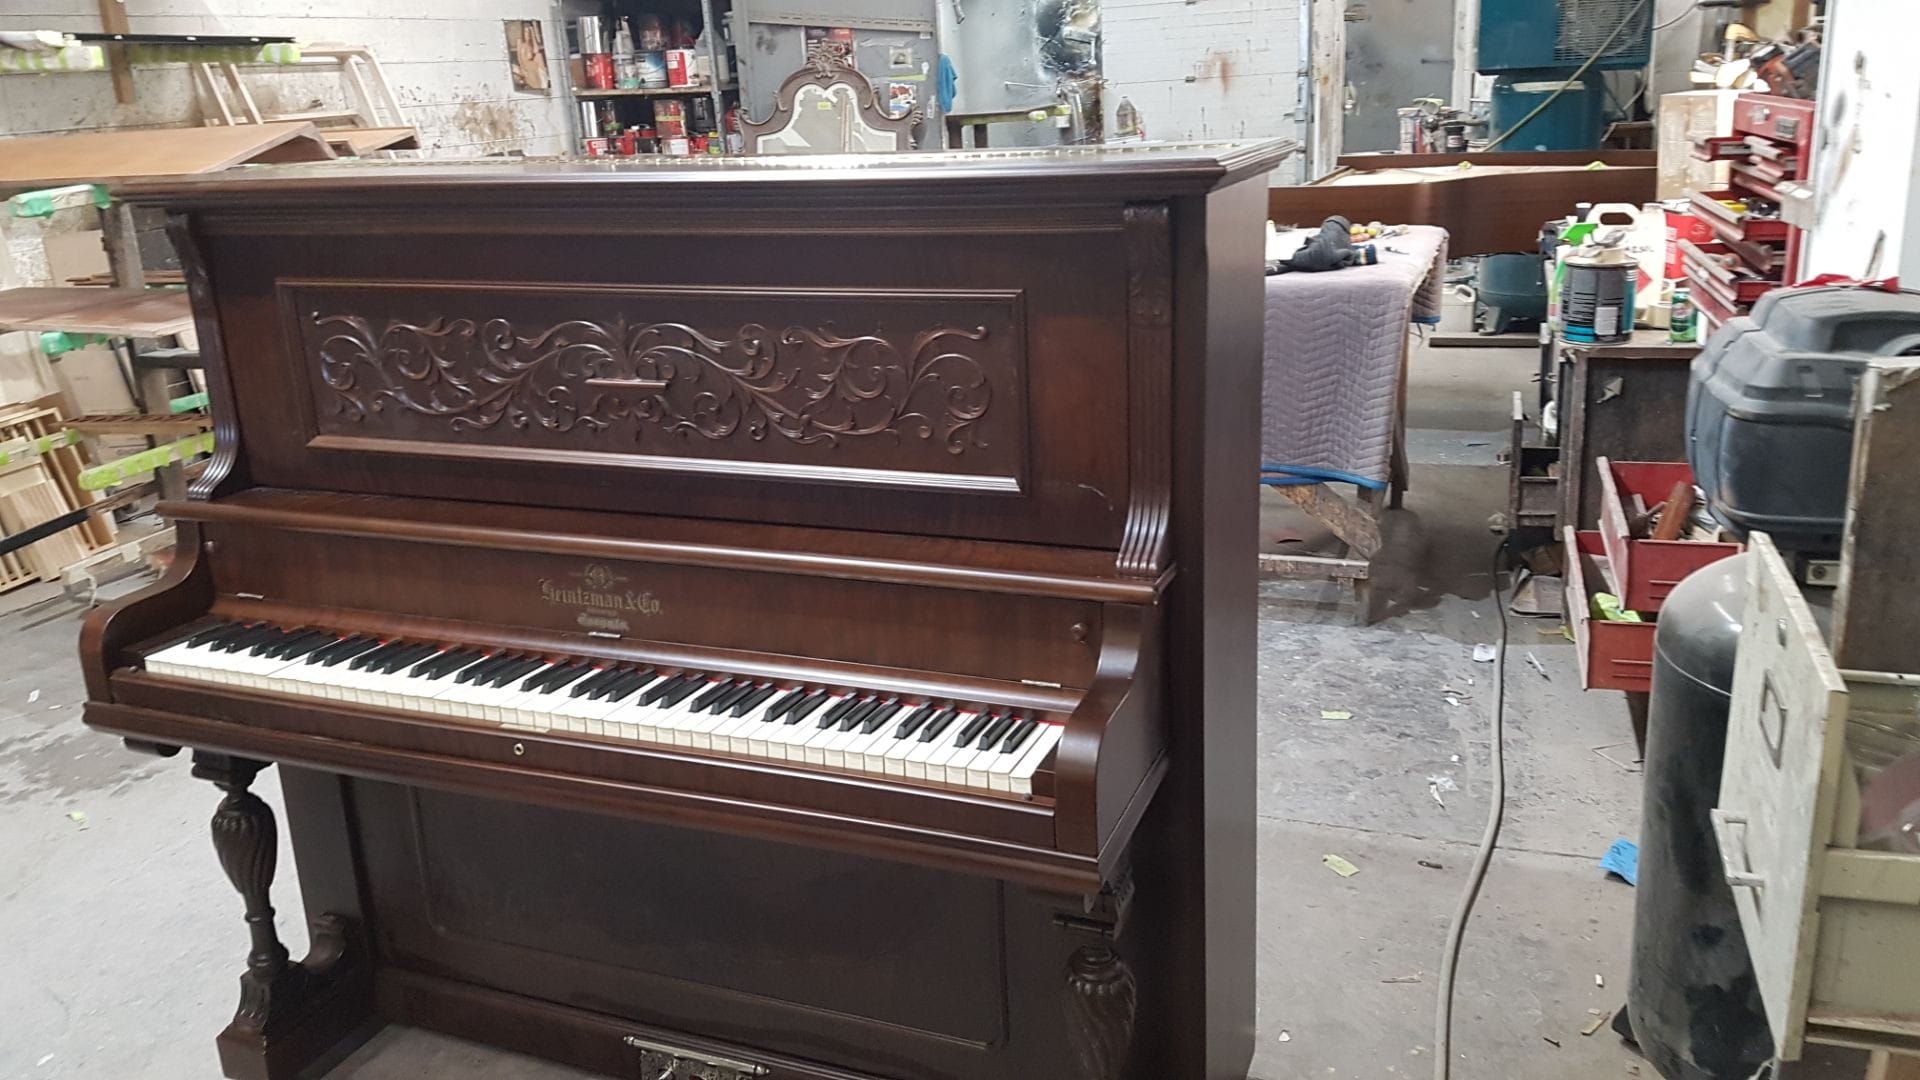 Is your piano scratched or in need of refinishing?  Is it old and does it have cracks?
Call Angelo's Furniture Restoration at 647-560-2788